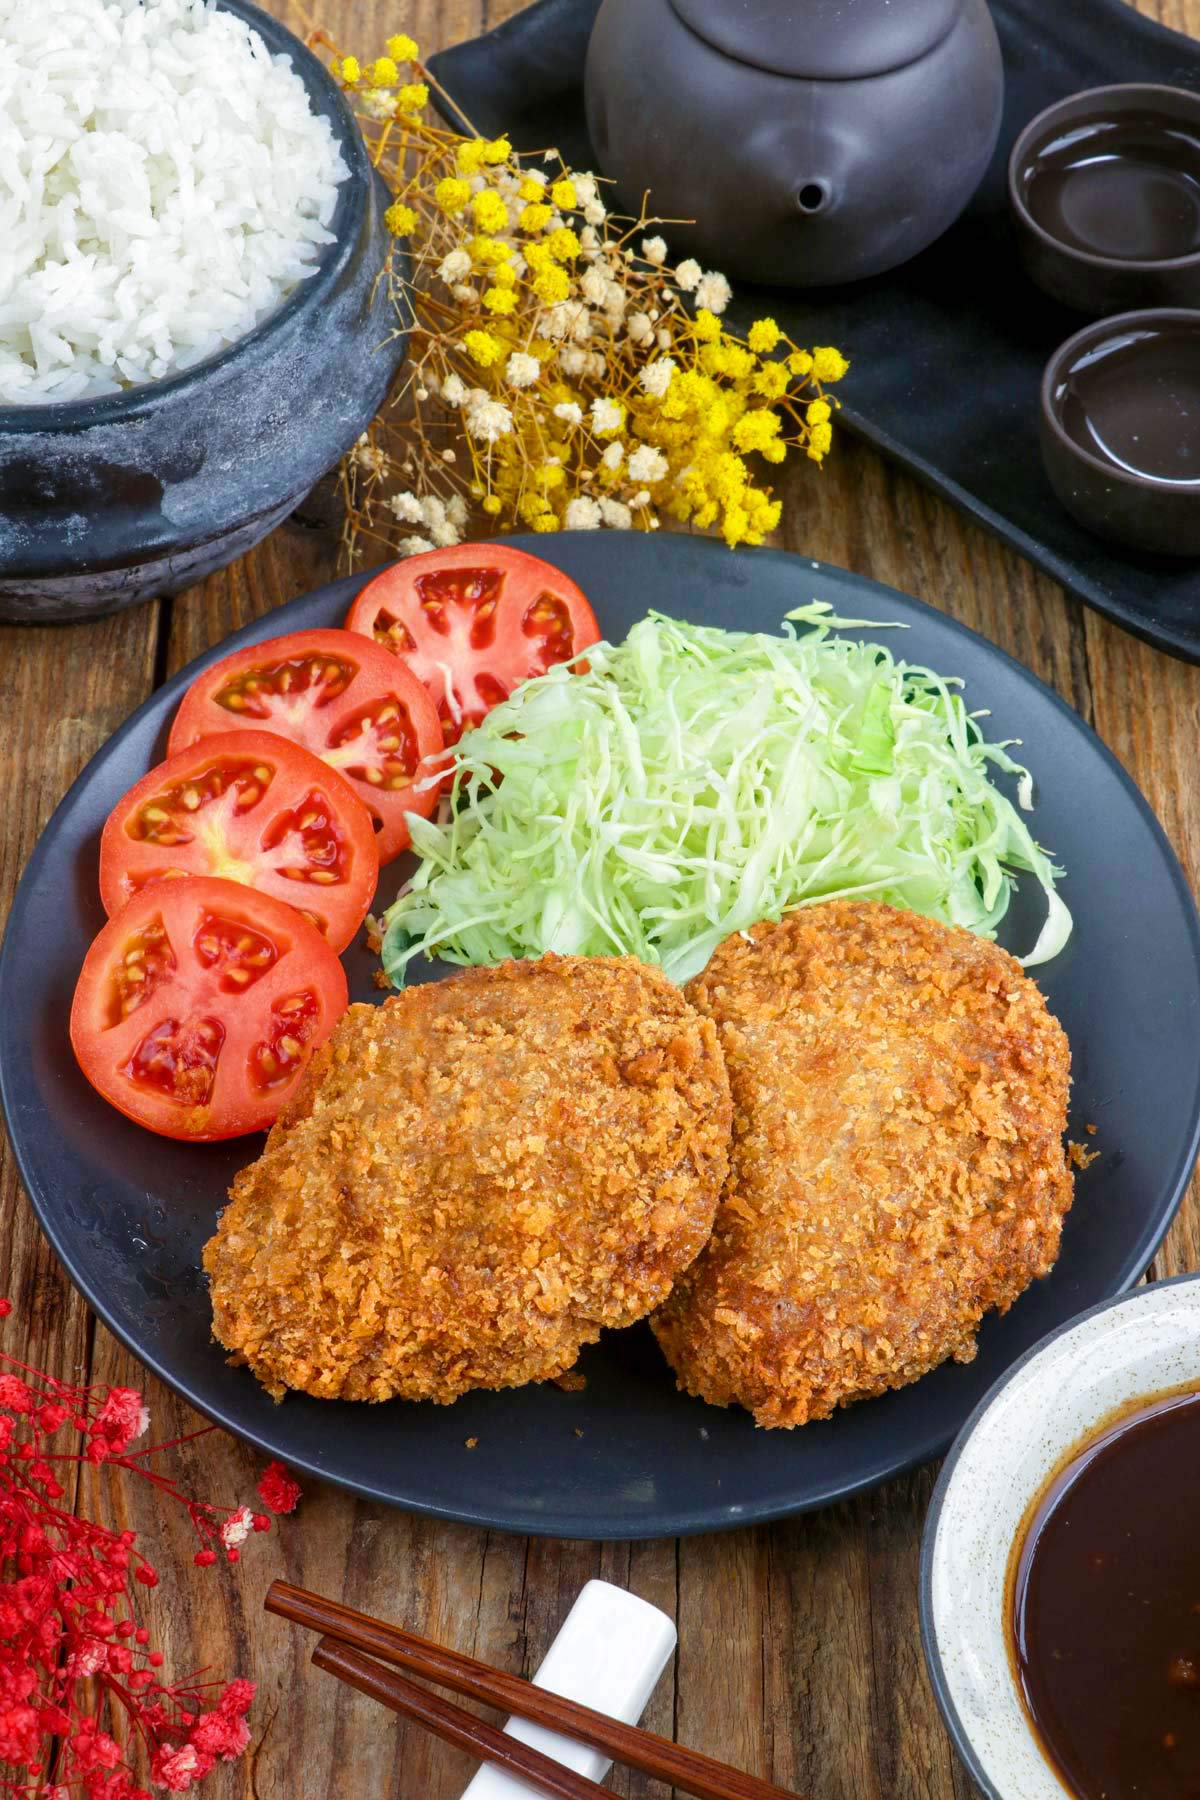 Japanese breaded patty fried to golden perfection.